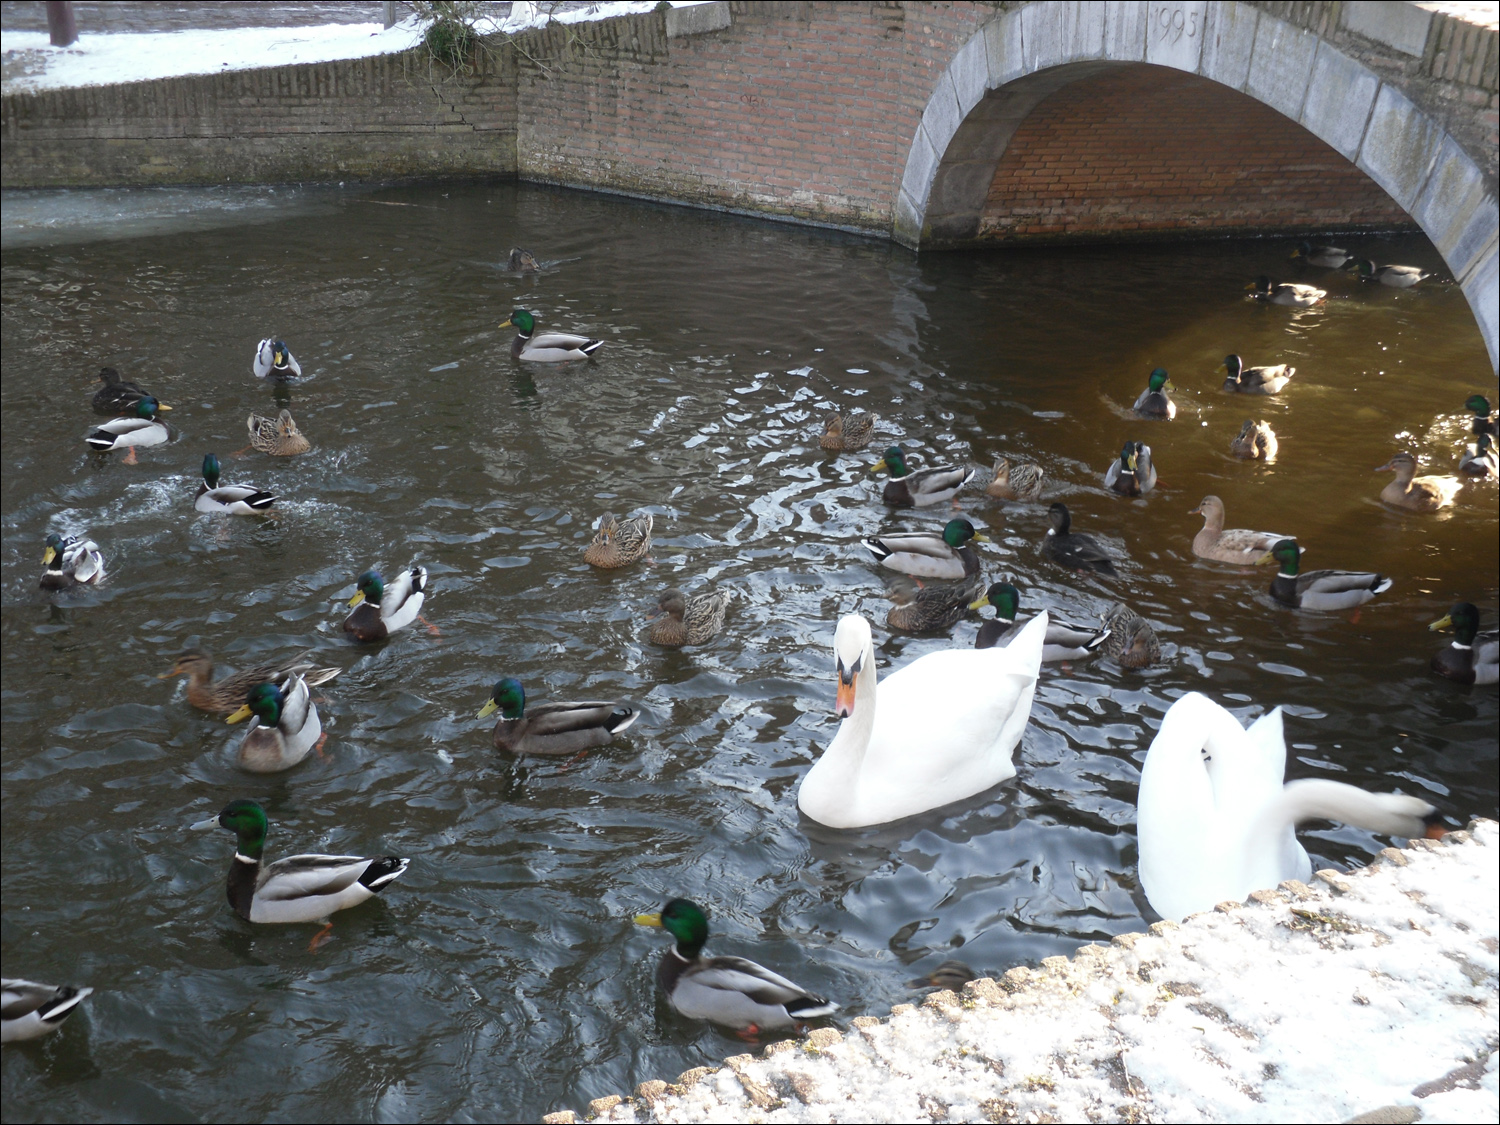 Ducks & swans in Delft canal